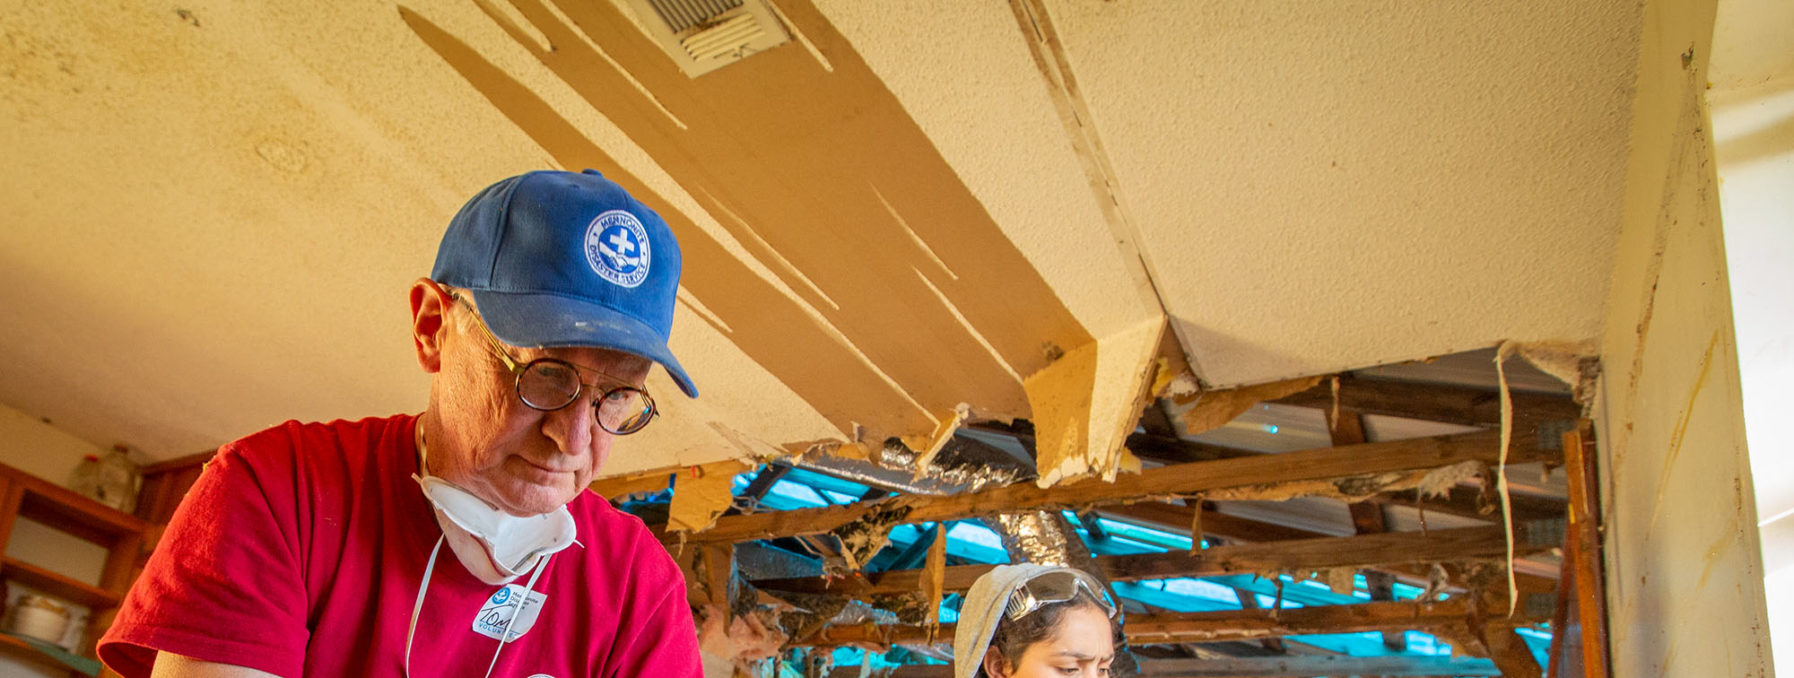 MDS volunteers repair and build homes in the Florida Panhandle, after October 2018's Hurricane Michael.